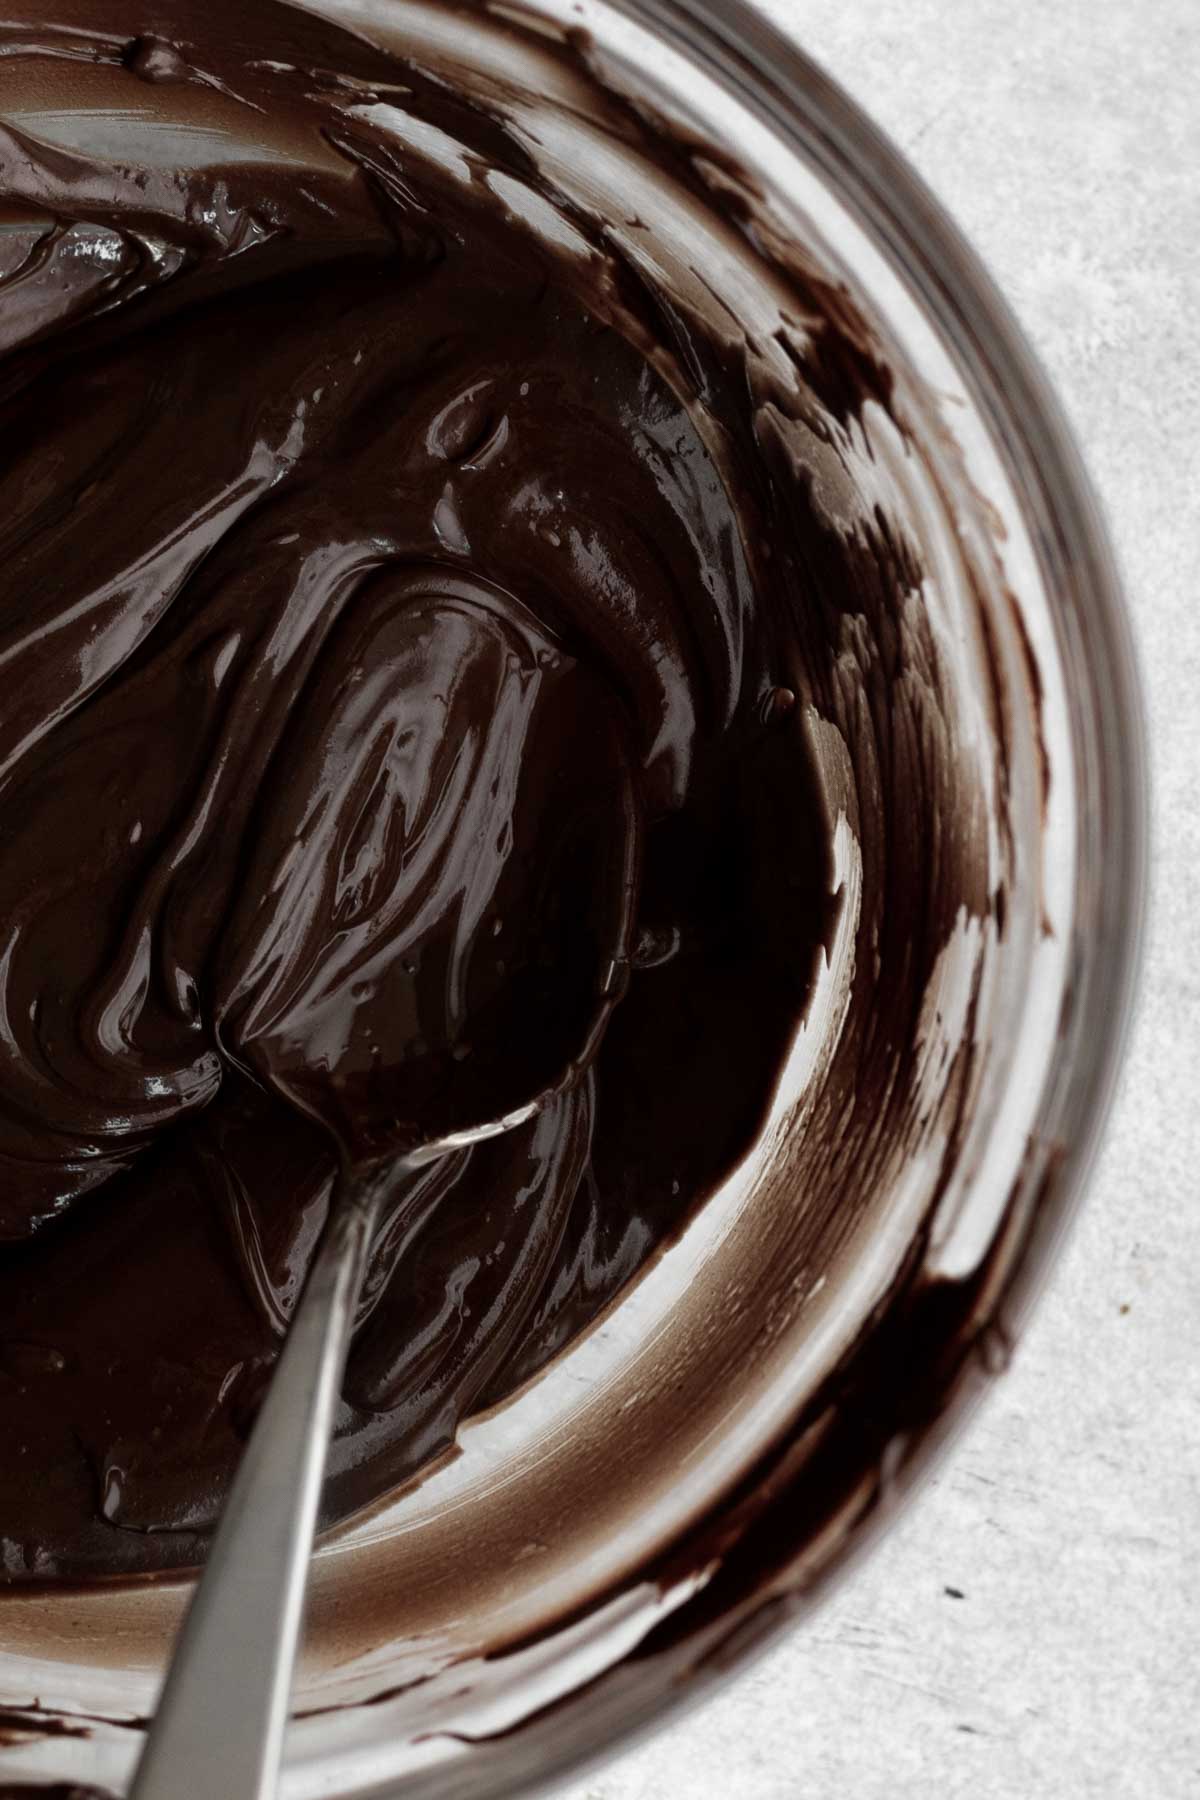 Smooth Melted chocolate in a bowl.